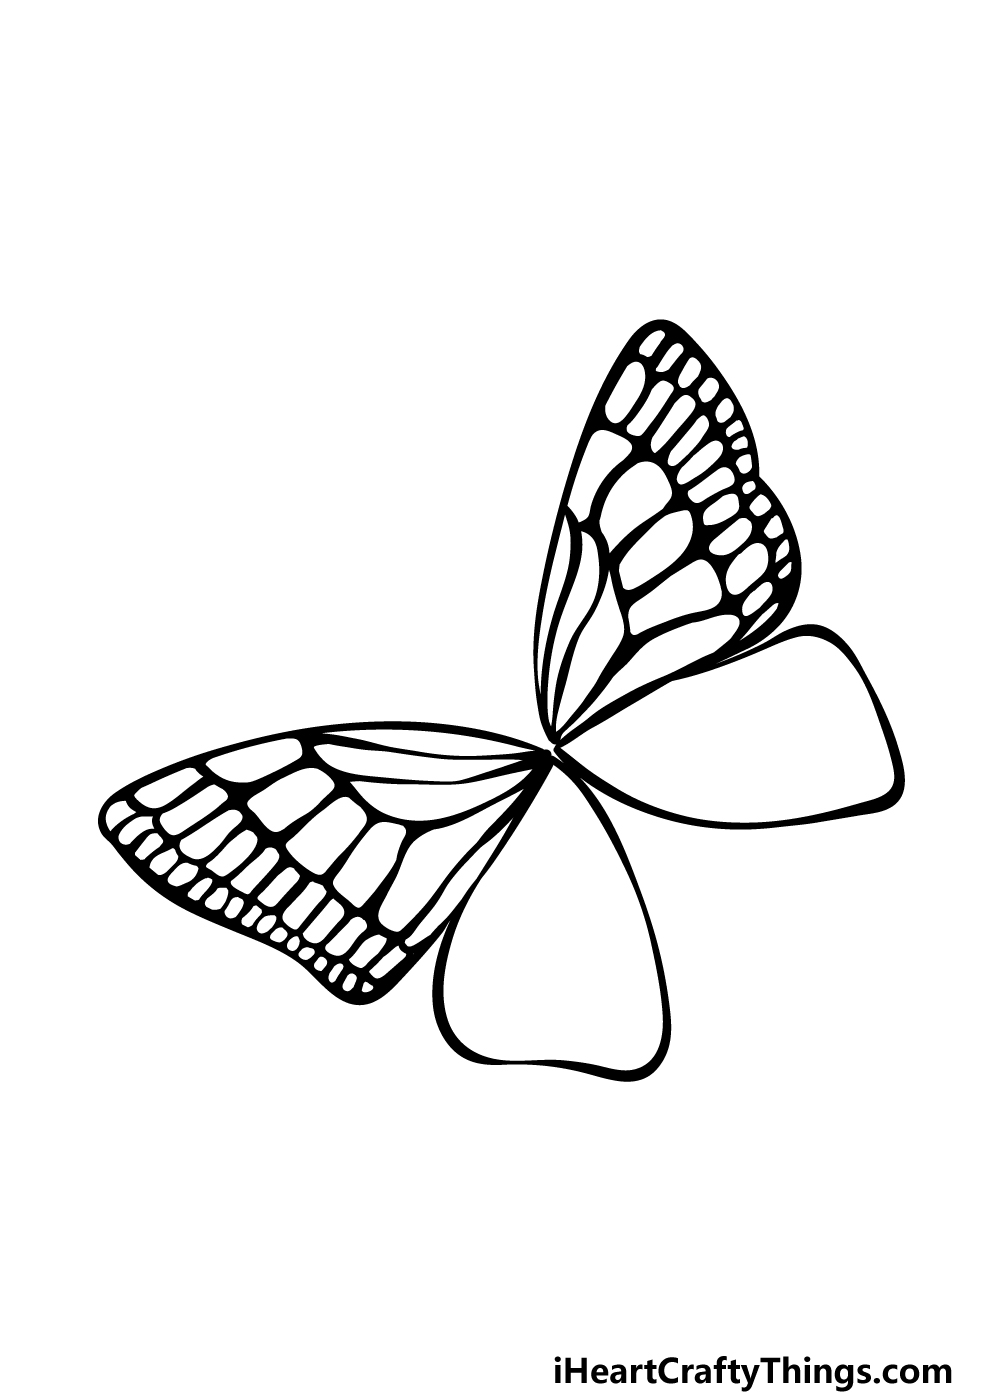 Butterfly Drawing | How to draw a 3D Butterfly Step by Step-vinhomehanoi.com.vn